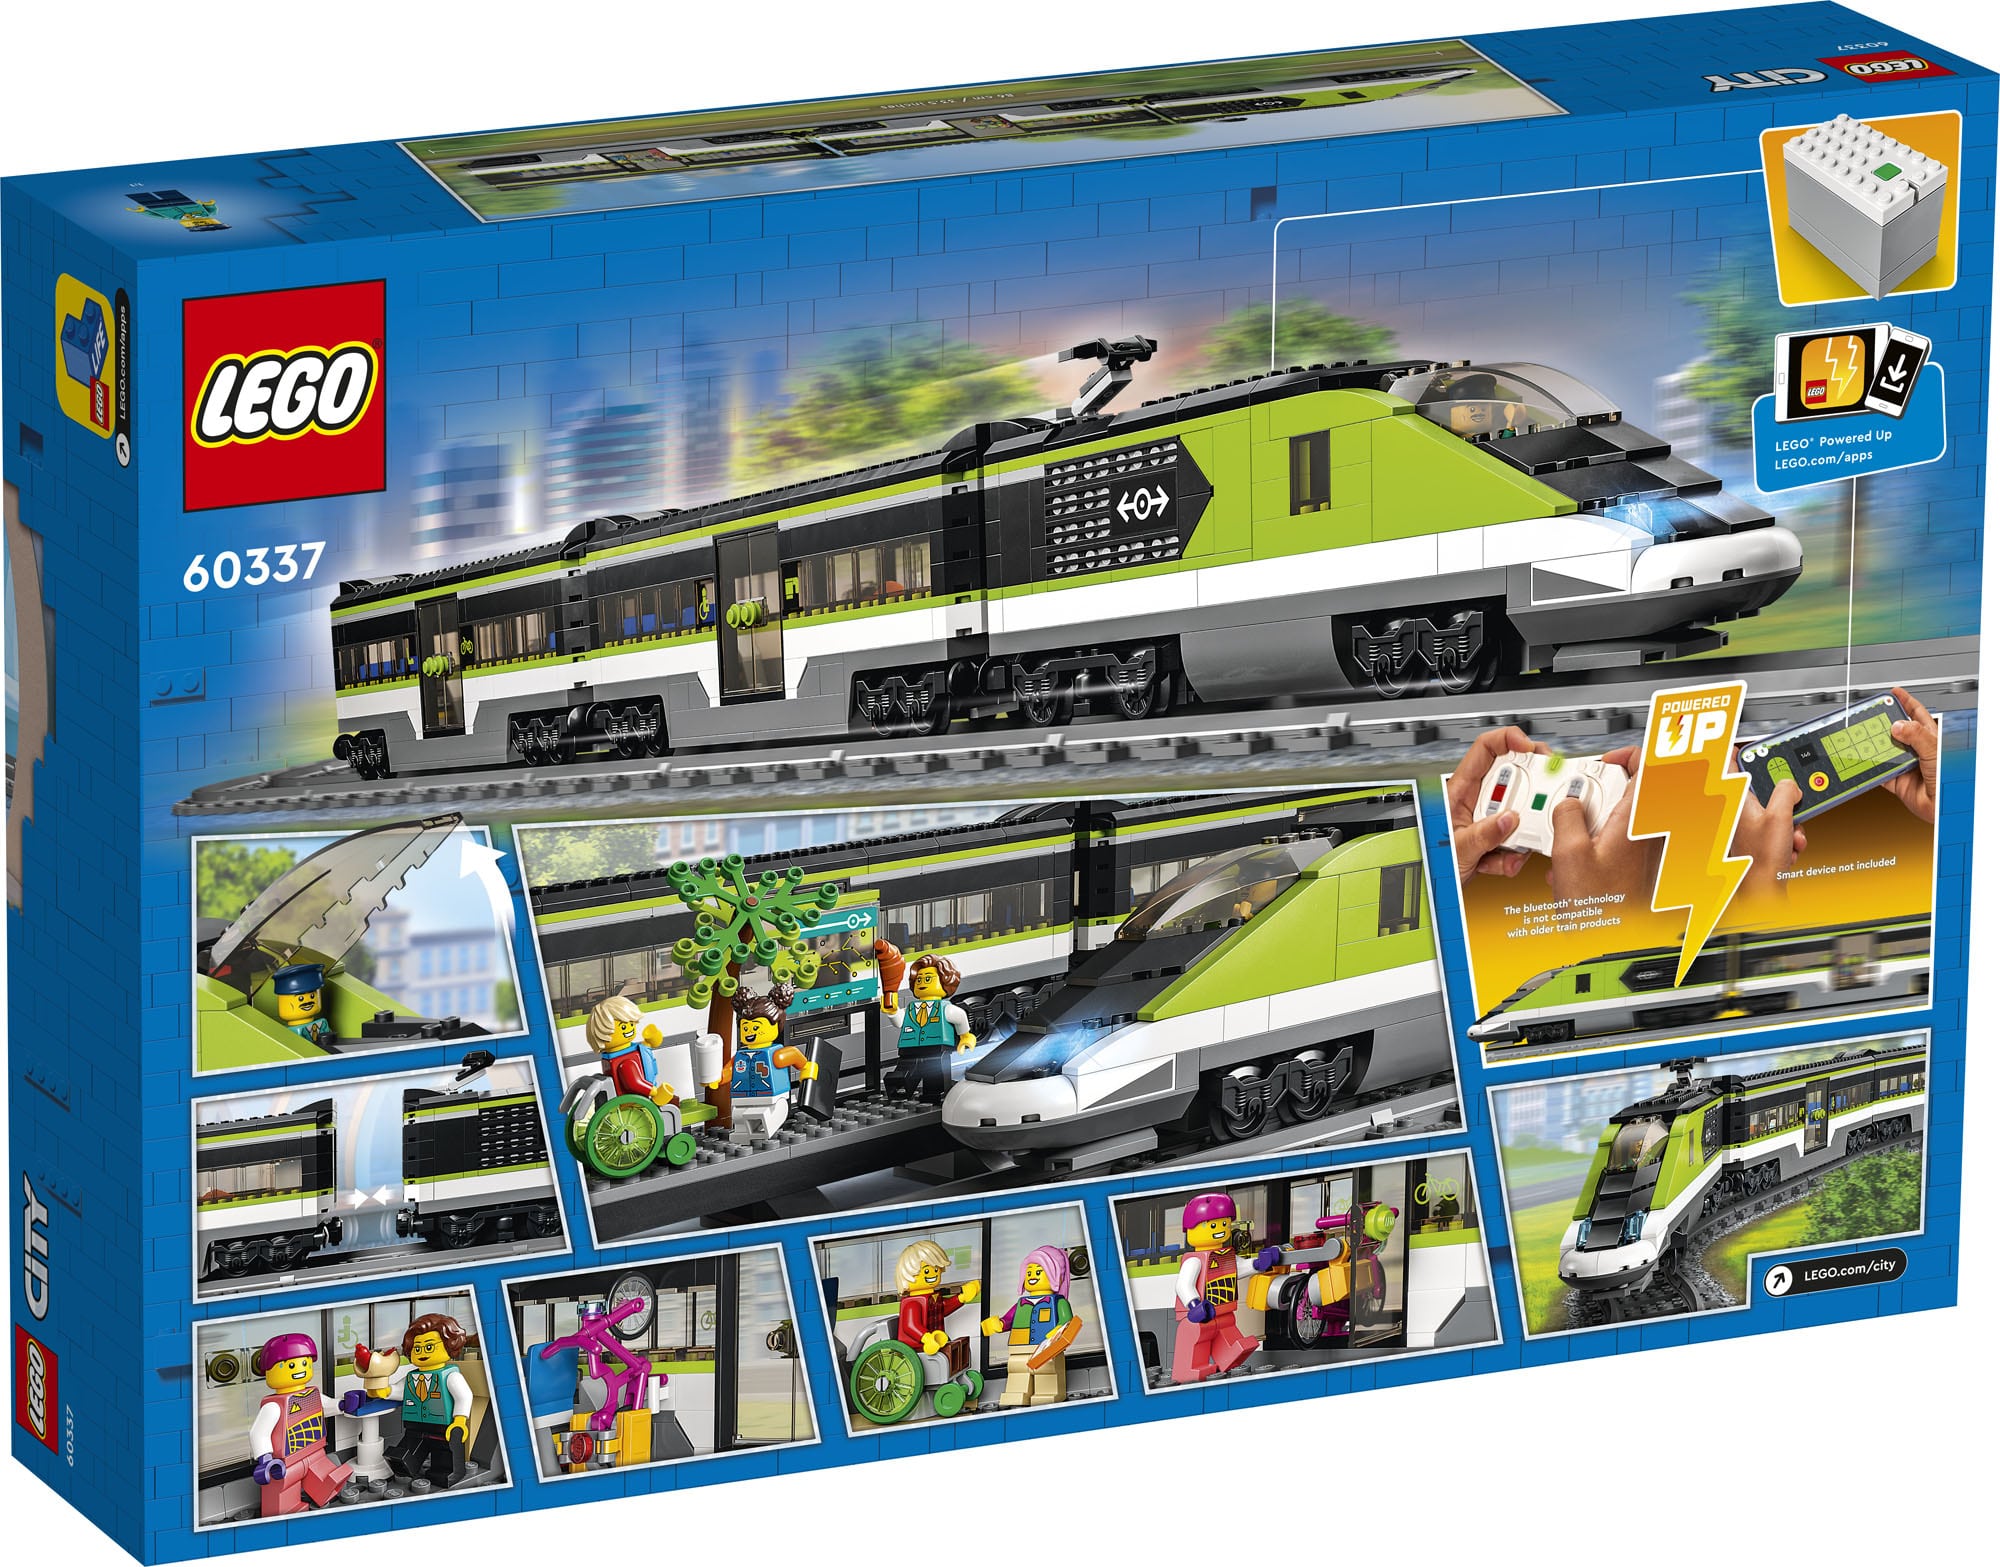 LEGO City Train 2022 sets now available! My thoughts. - GJBricks LEGO Blog